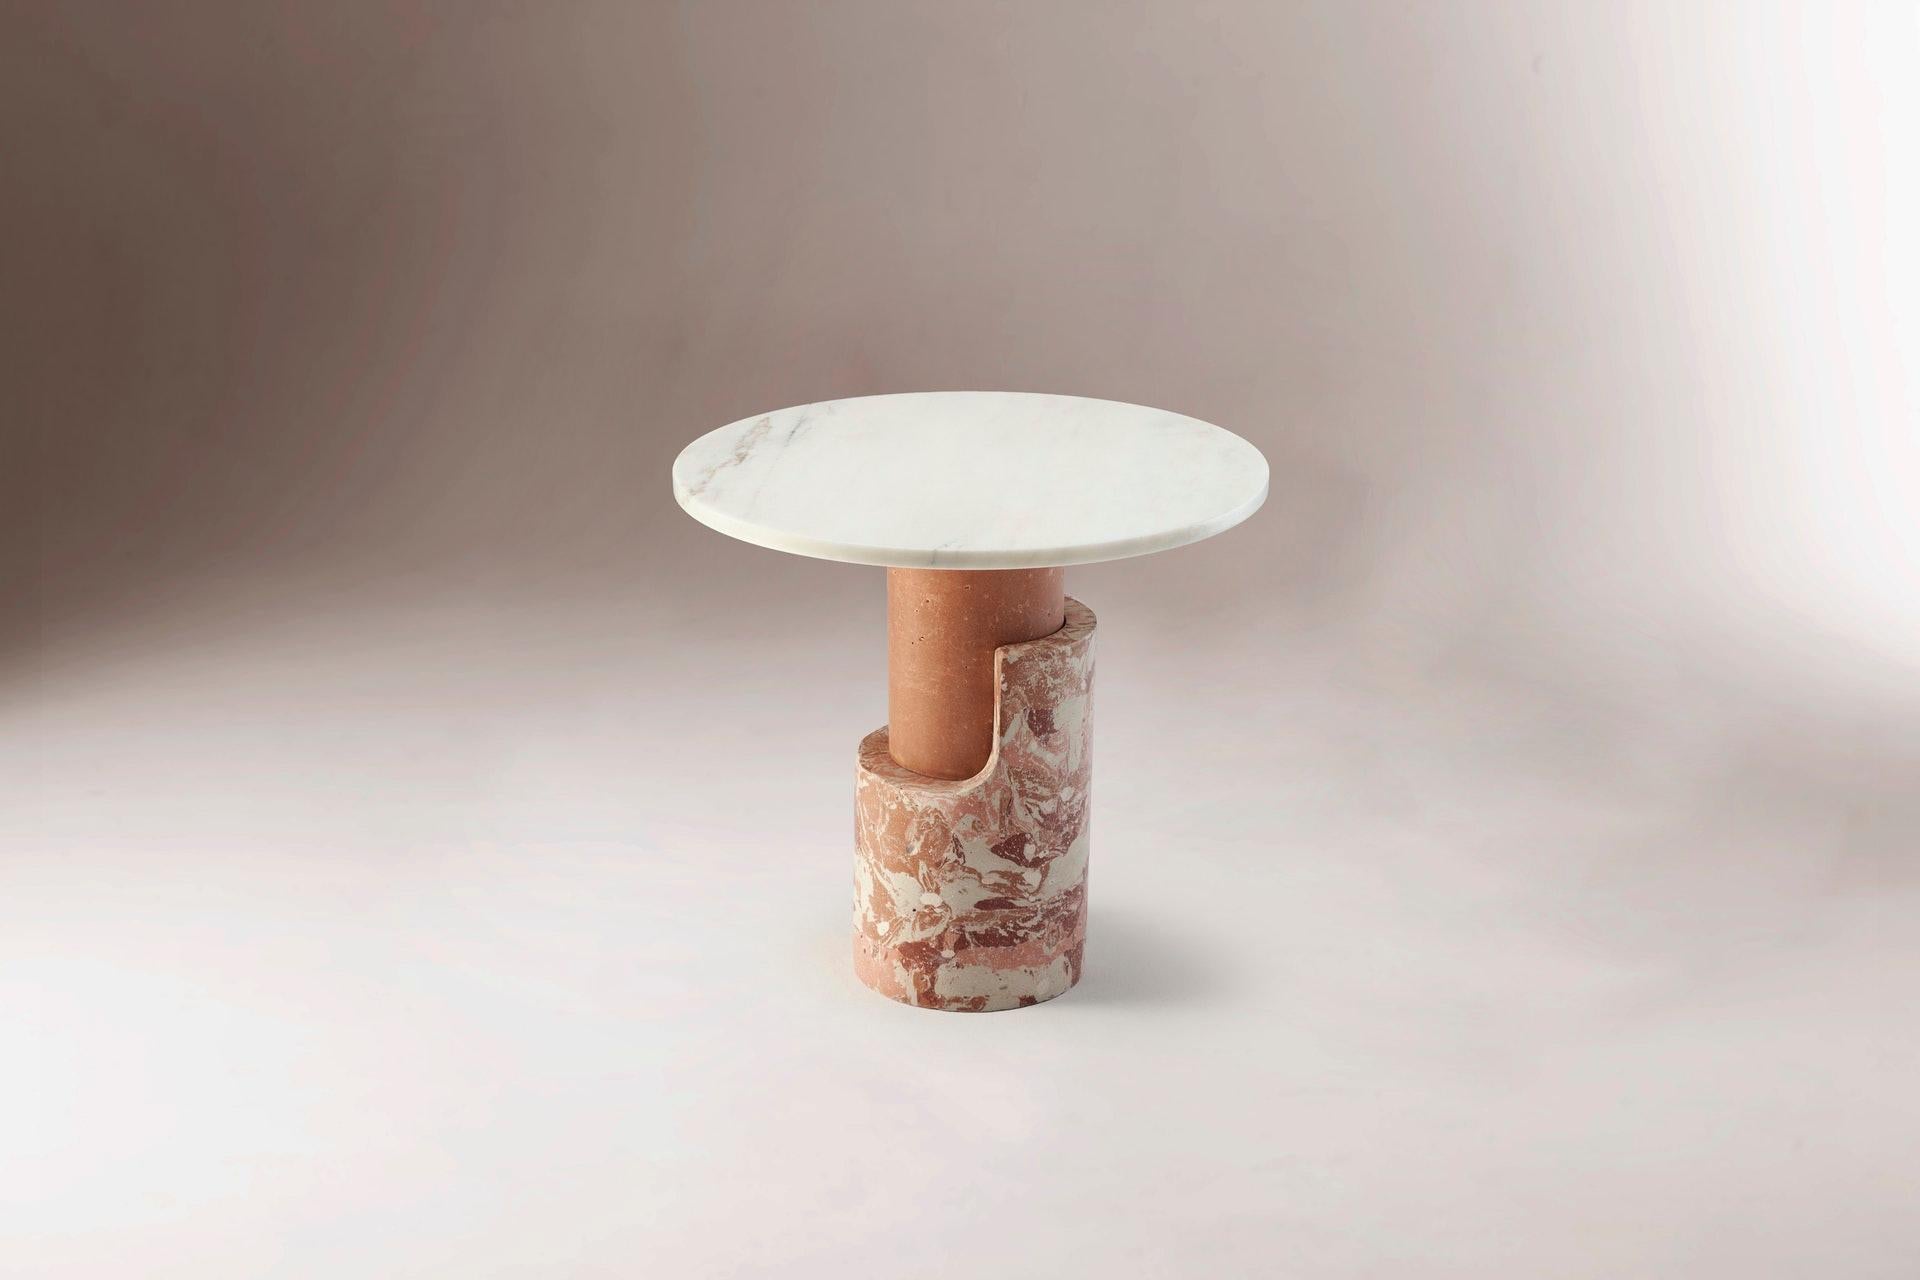 Braque Contemporary marble side table by Dooq
Dimensions: W 60 x D 60 x H 55 cm
Materials: Entirely hand made in marble

Product
The Braque Side Table is an elegant and slick side table created by Dooq. Braque is entirely hand made in marble, with a